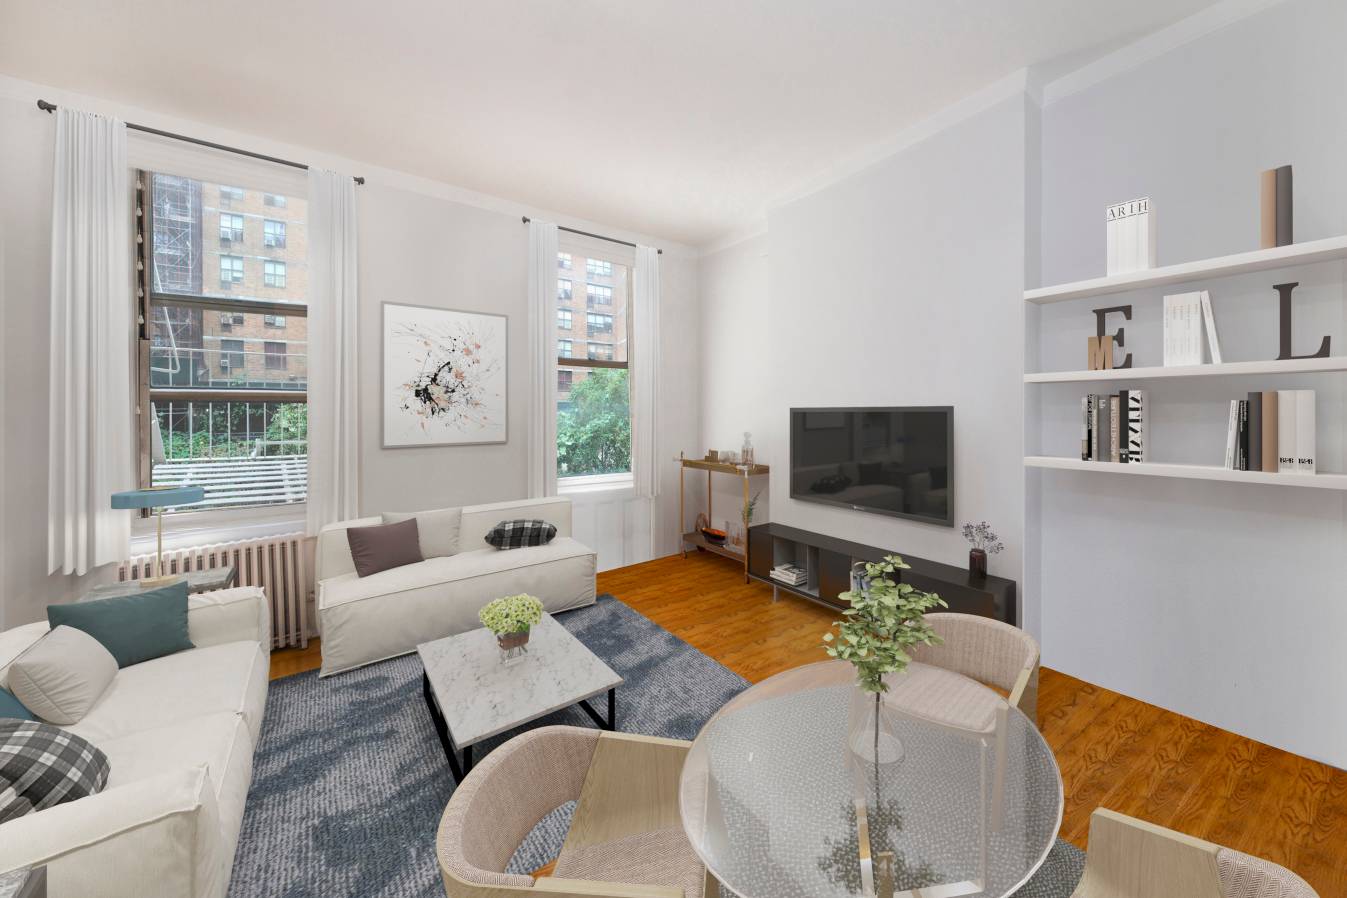 Situated one flight up and at the rear of the building, 8 at 634 E 14th Street provides both accessibility to the East Village's trendy Alphabet City and complete privacy ...